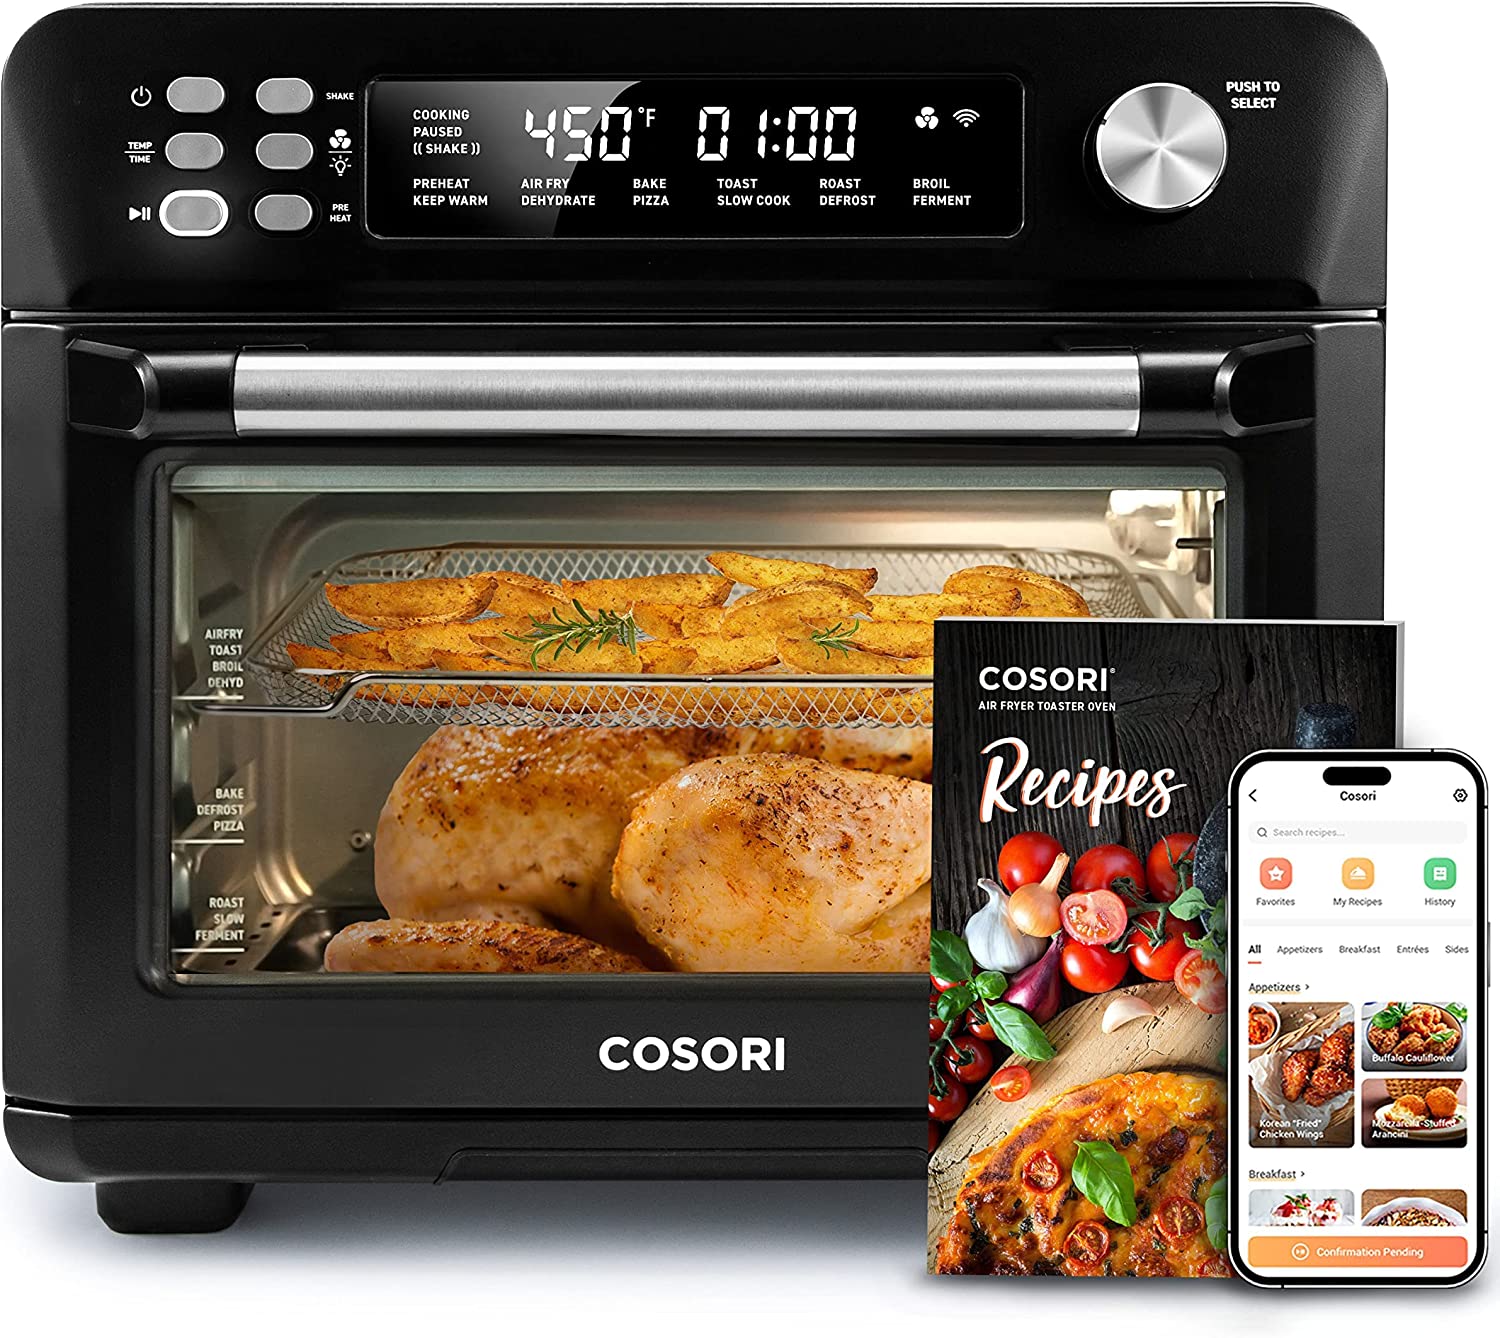 COSORI Air Fryer Toaster Oven 26.4QT, 12-in-1 Convection Ovens Countertop Combo, 6-Slice Toast, 12-inch Pizza, Basket, Tray, Recipes &3 Accessories, Wifi, CS100-AO